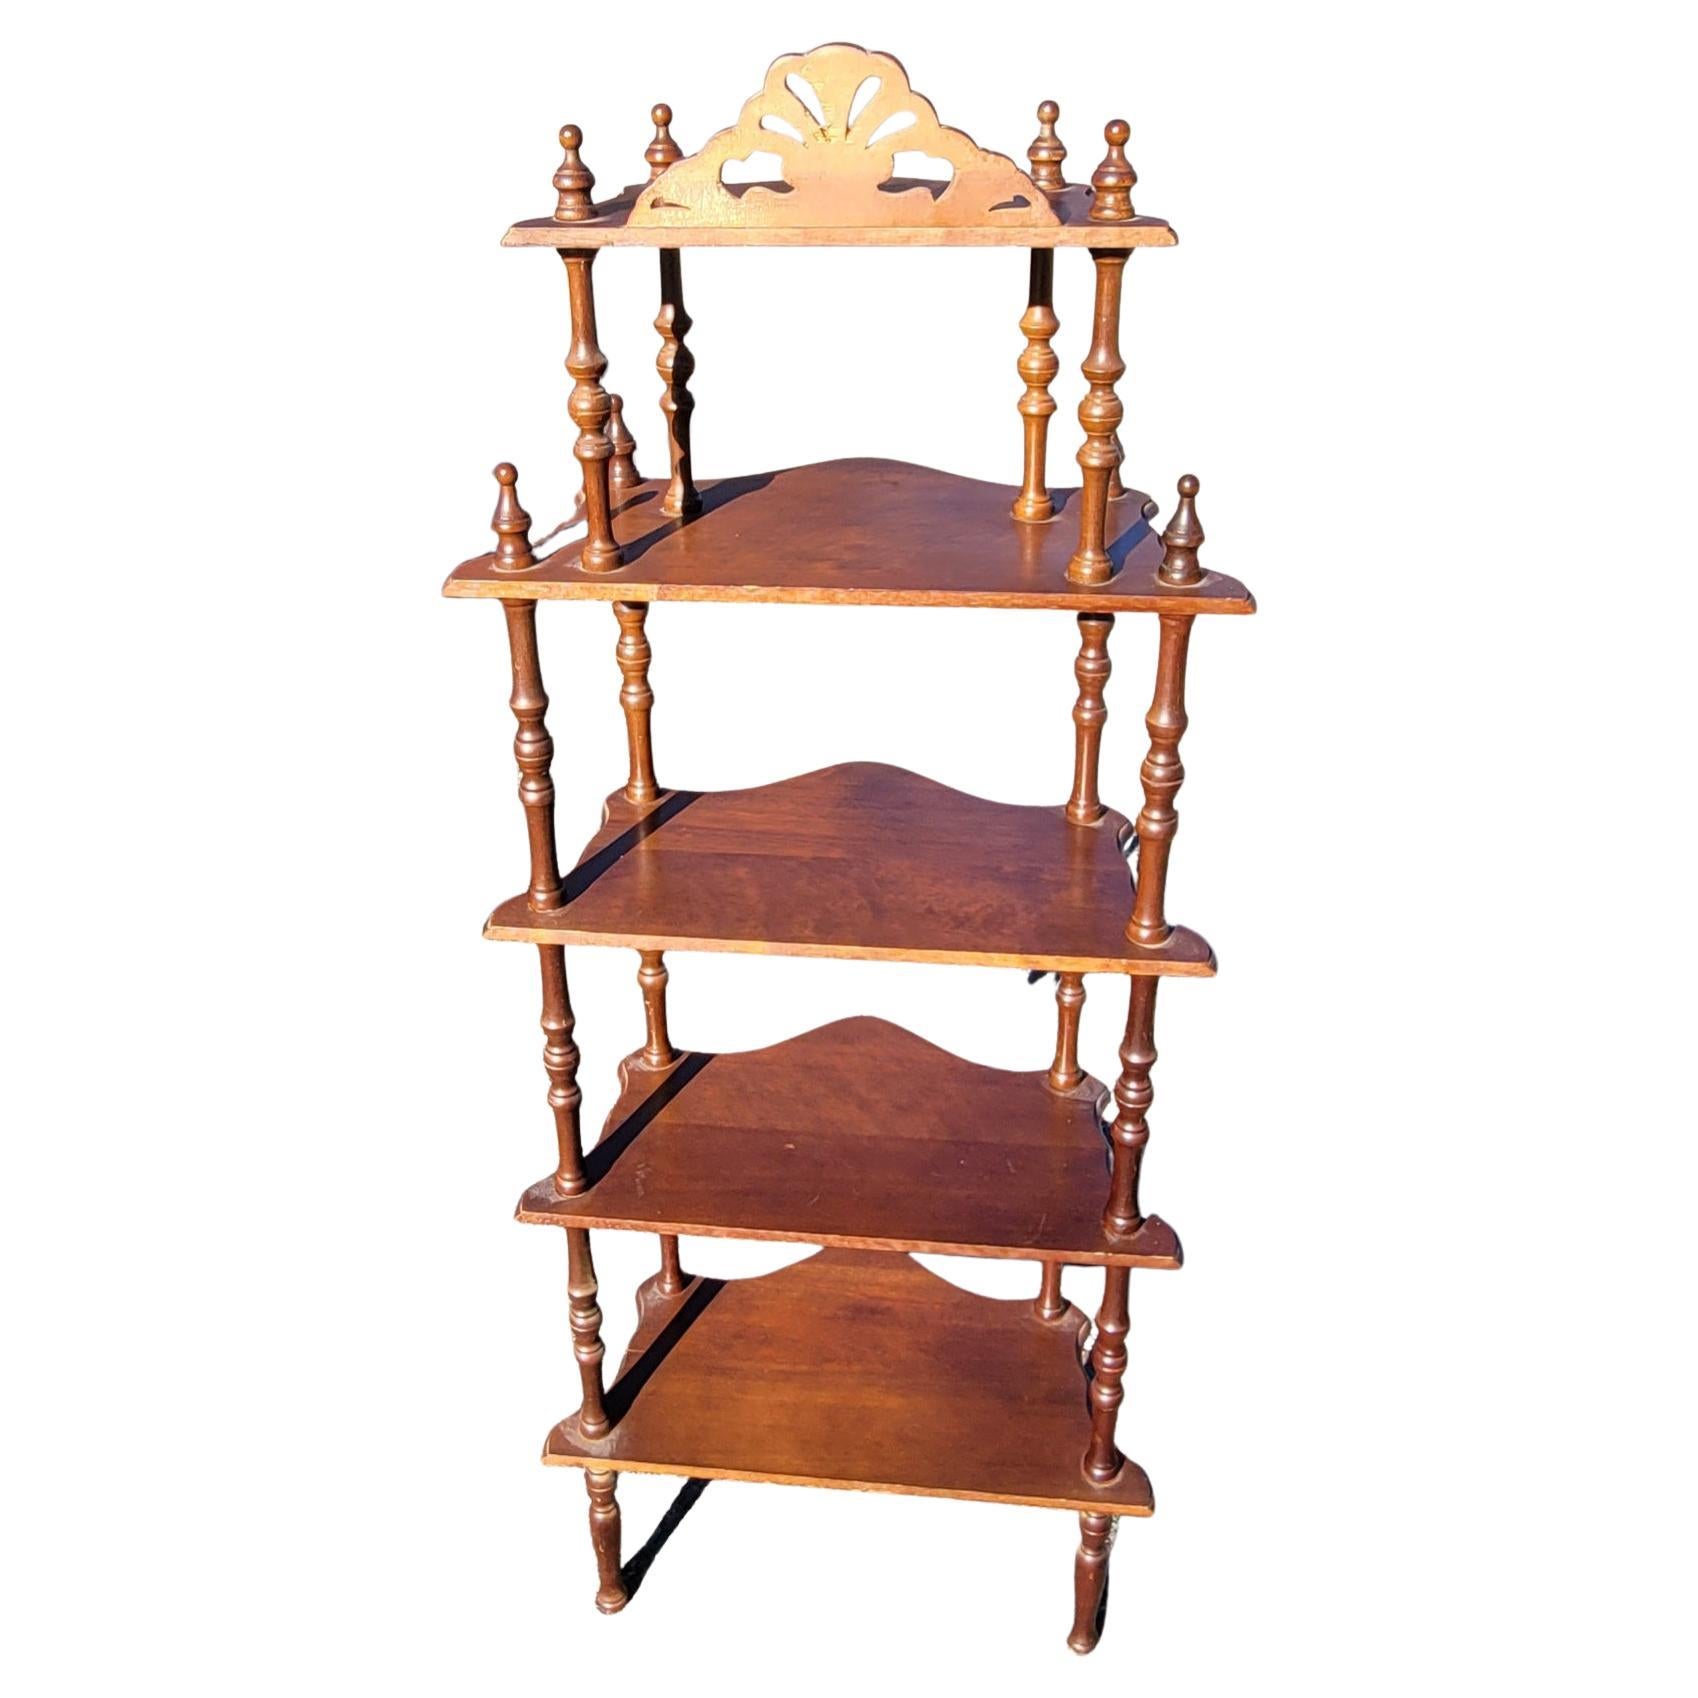 Hand-Carved Antique English Regency Style Carved Mahogany Narrow Etagere, Circa 1920s For Sale